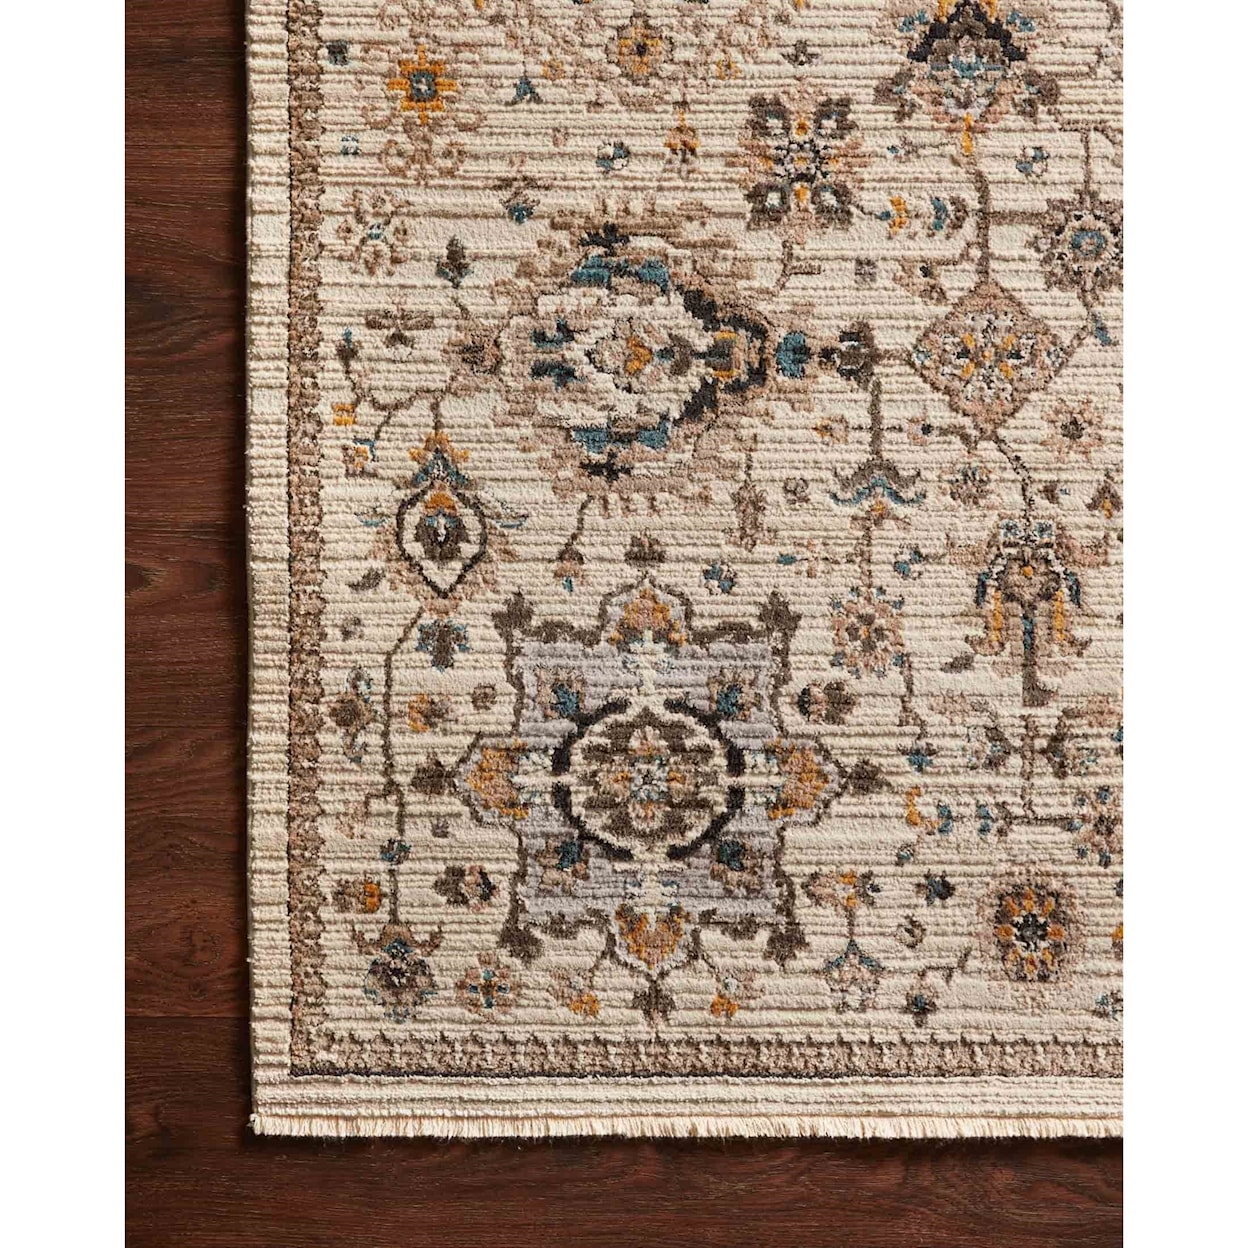 Reeds Rugs Leigh 4'0" x 5'5" Ivory / Taupe Rug